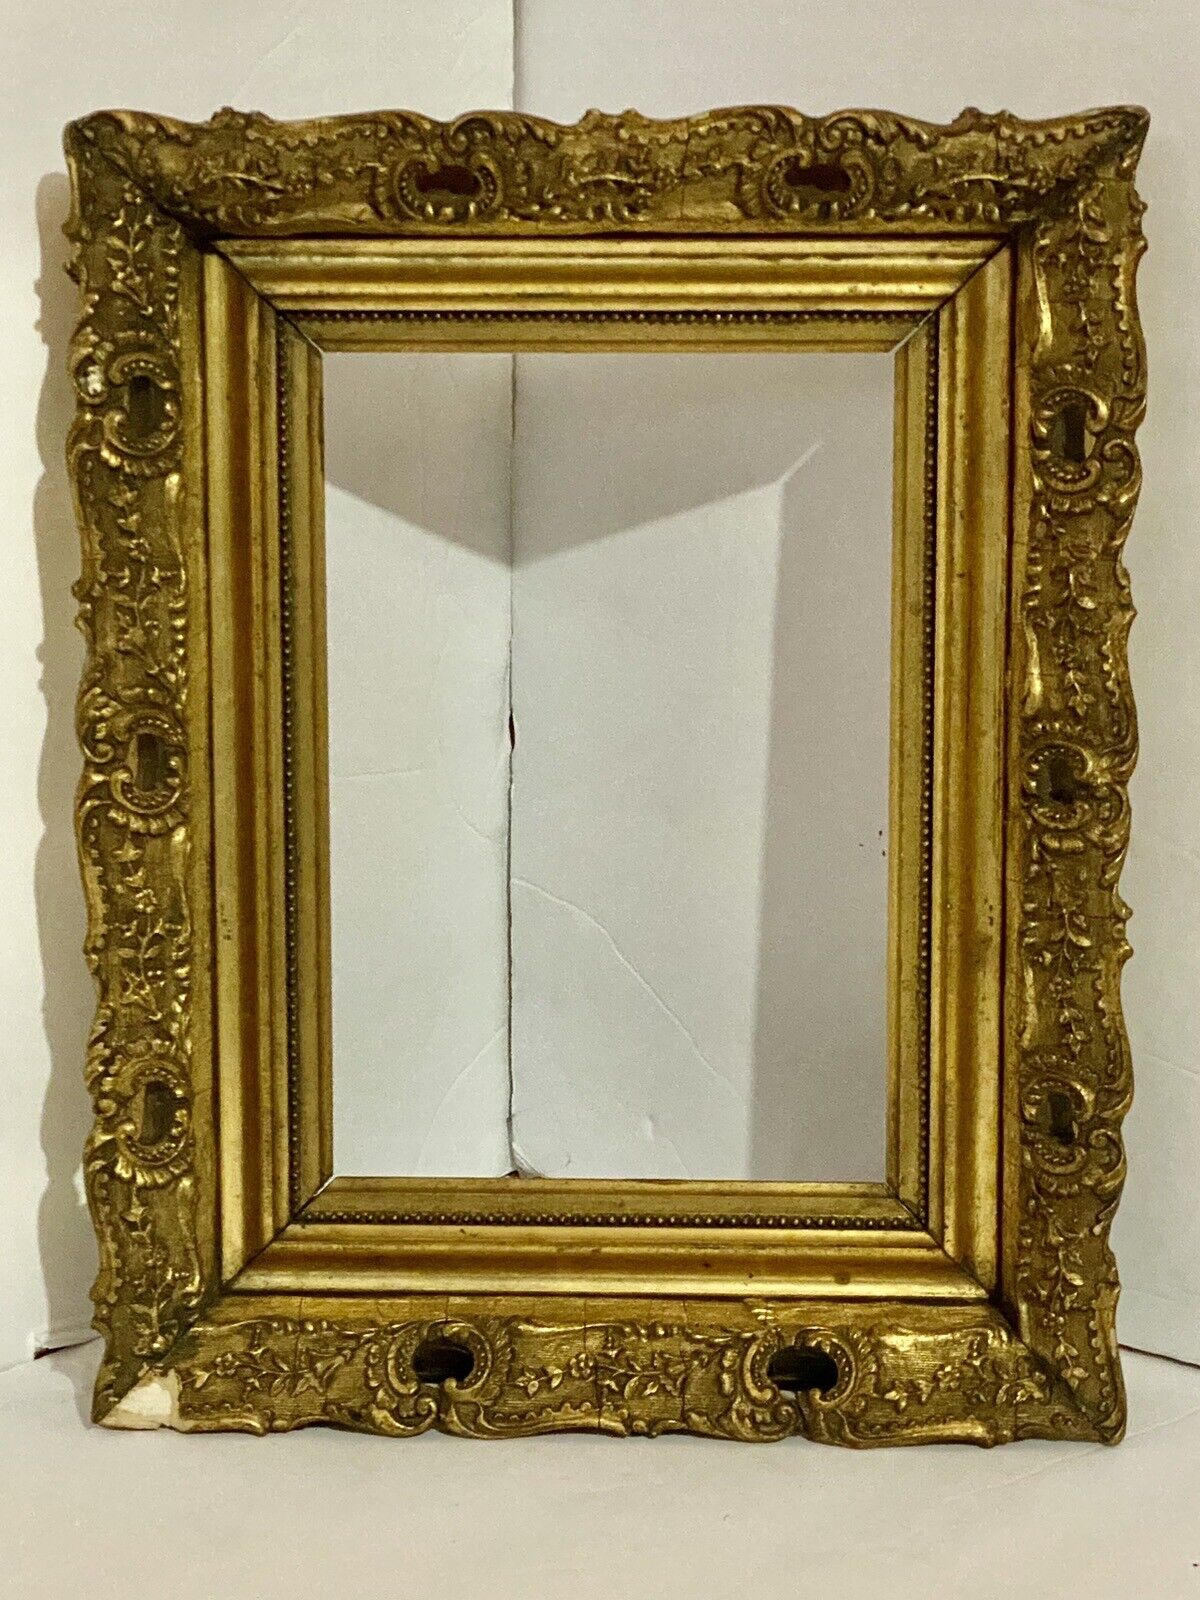 Antique French Victorian Ornate Picture Frame With Gilt Gesso & Floral Design